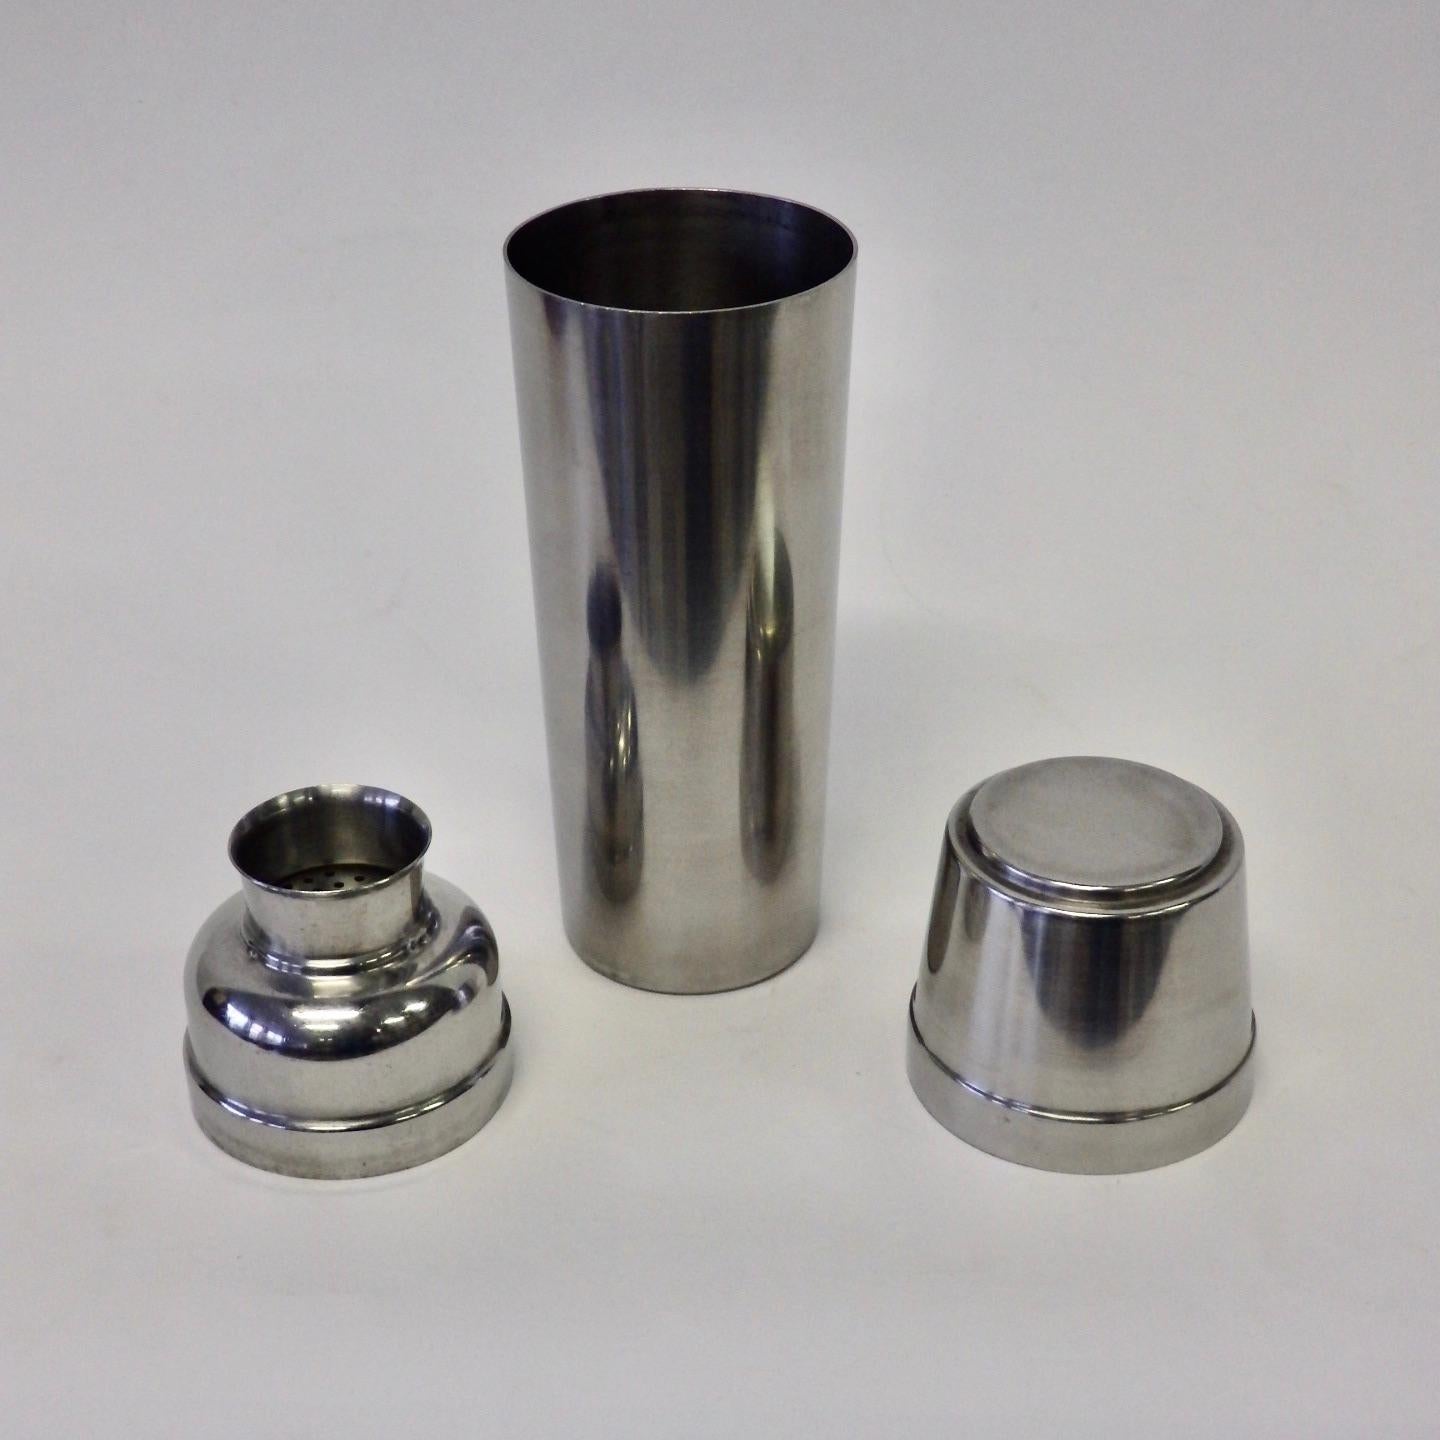 Swedish Made in Sweden Stainless Steel Cocktail Shaker For Sale